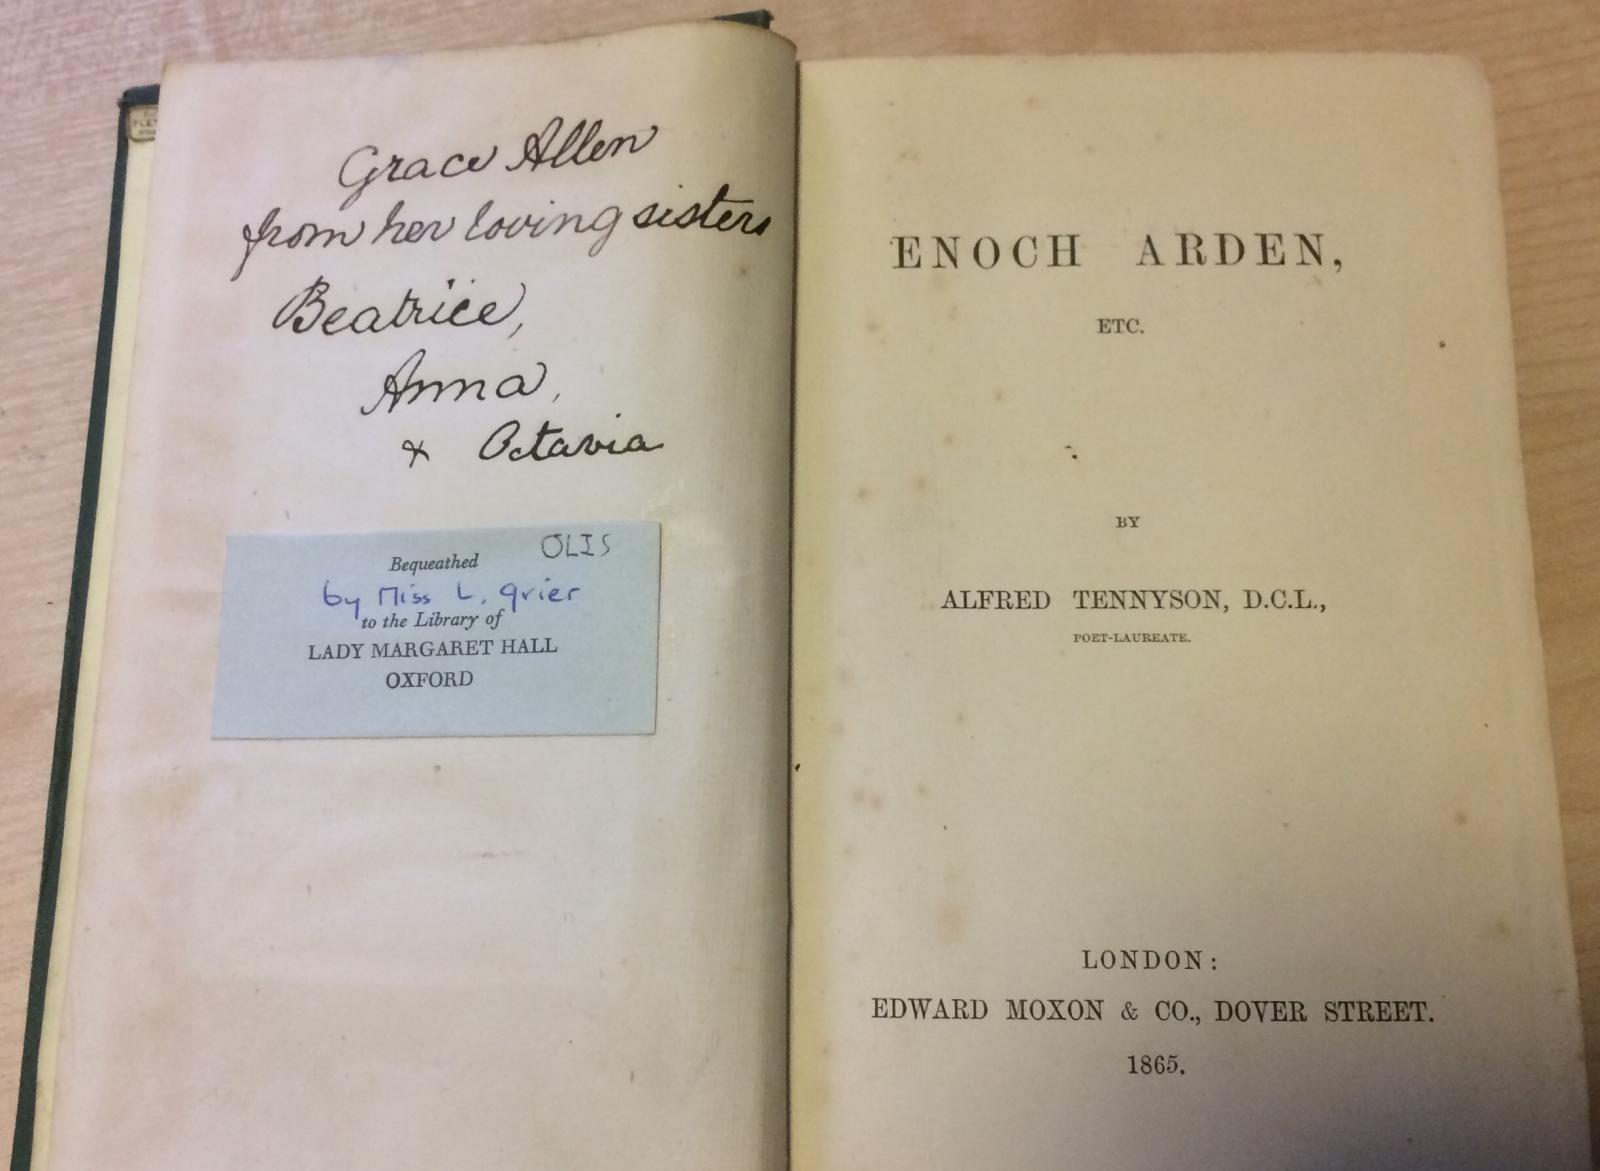 Note on a book by Tennyson, LMH library